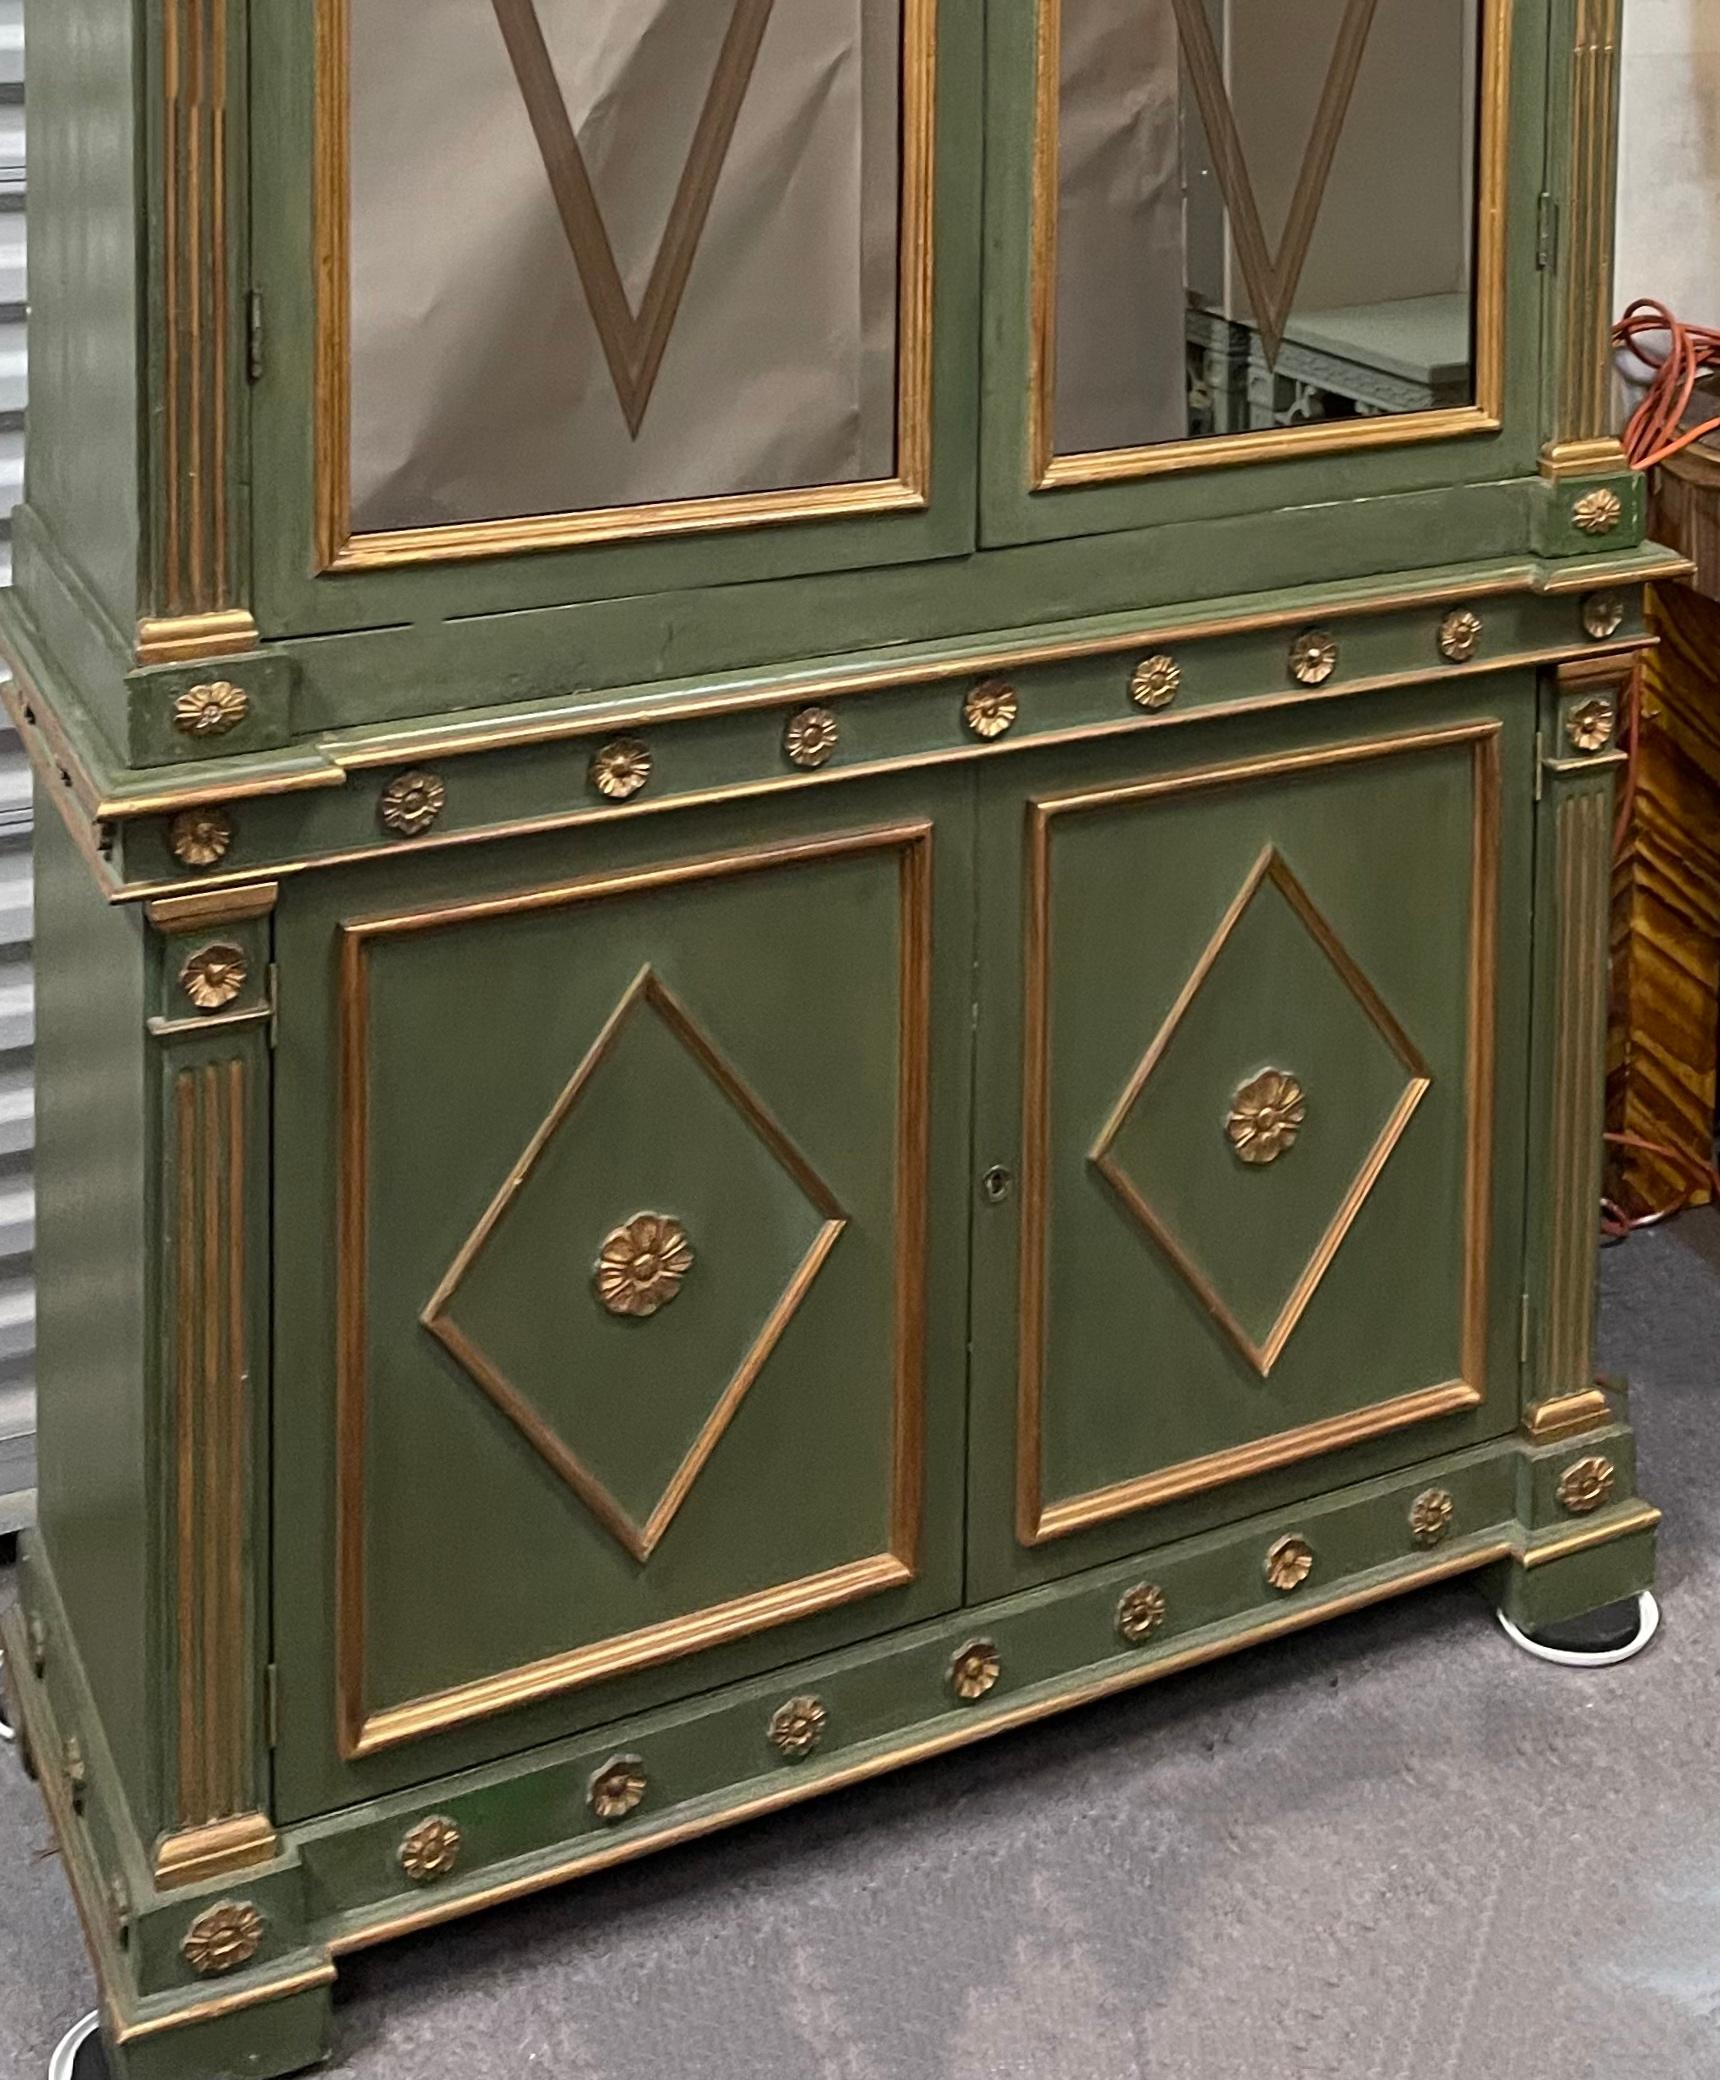 20th Century Early 20th-C. Painted Venetian Neo-Classical Style Cabinet or Bar